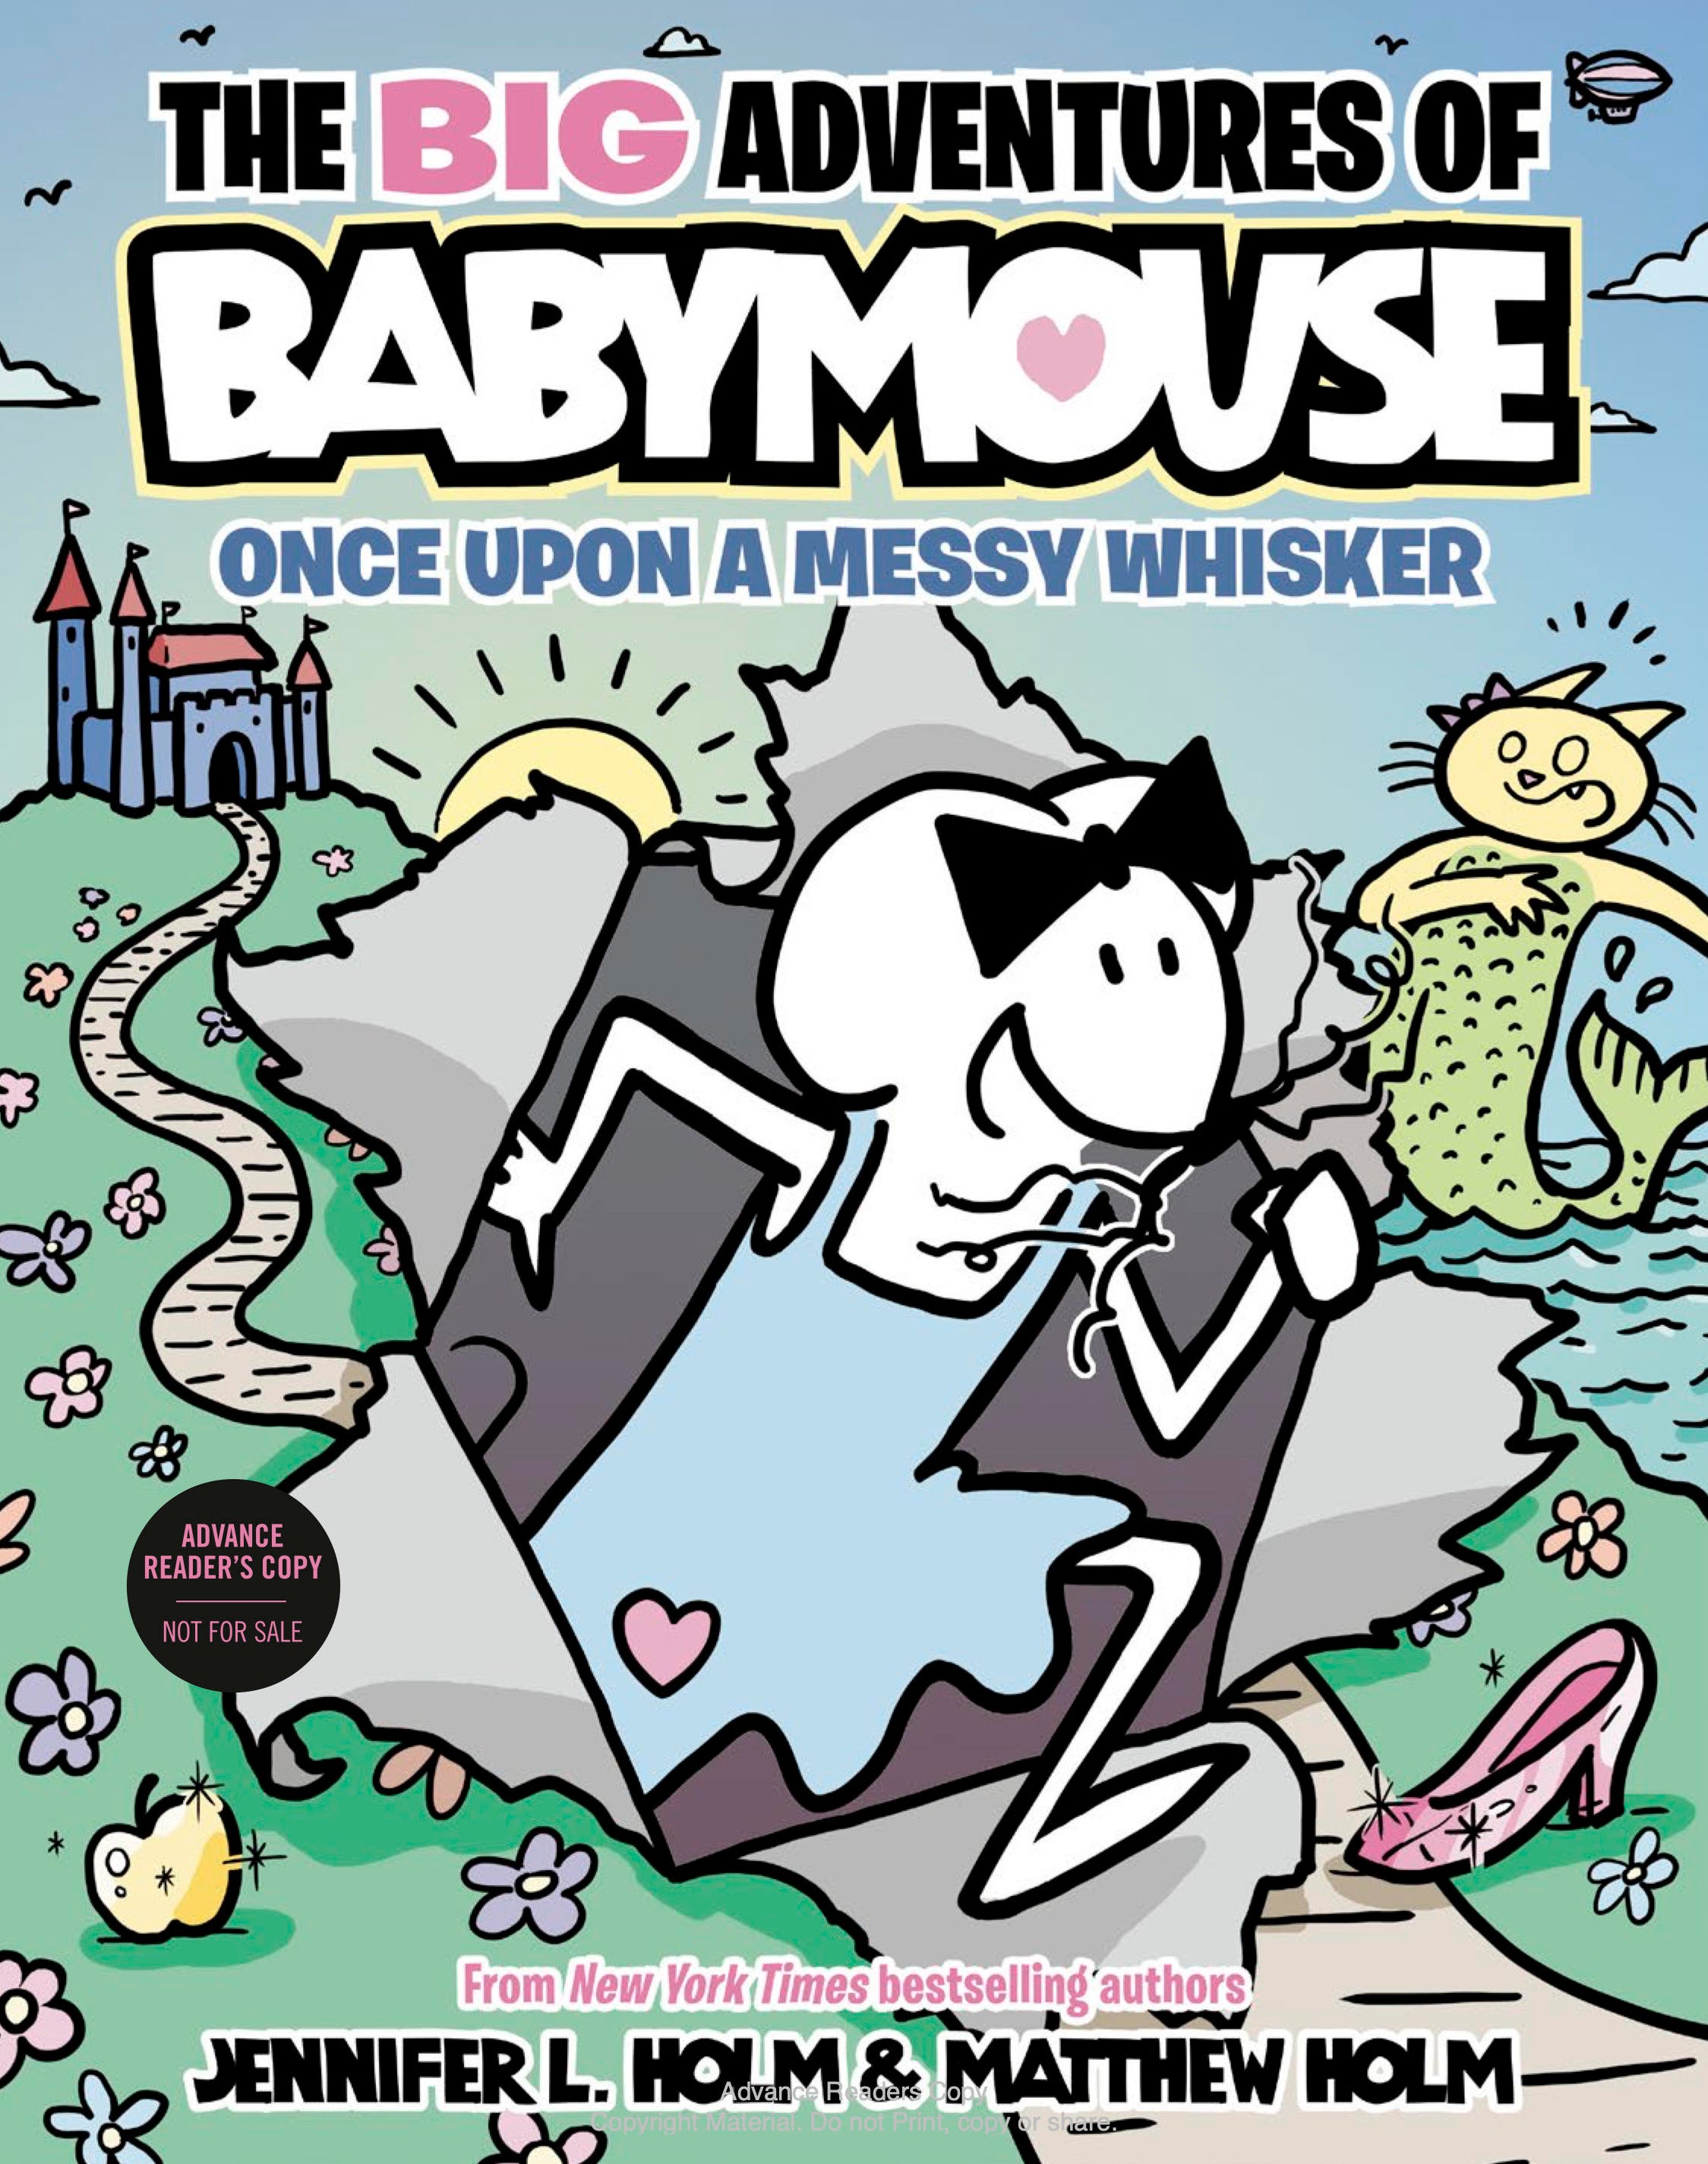 the-big-adventures-of-babymouse-once-upon-a-messy-whisker-book-1-cover-art.jpg